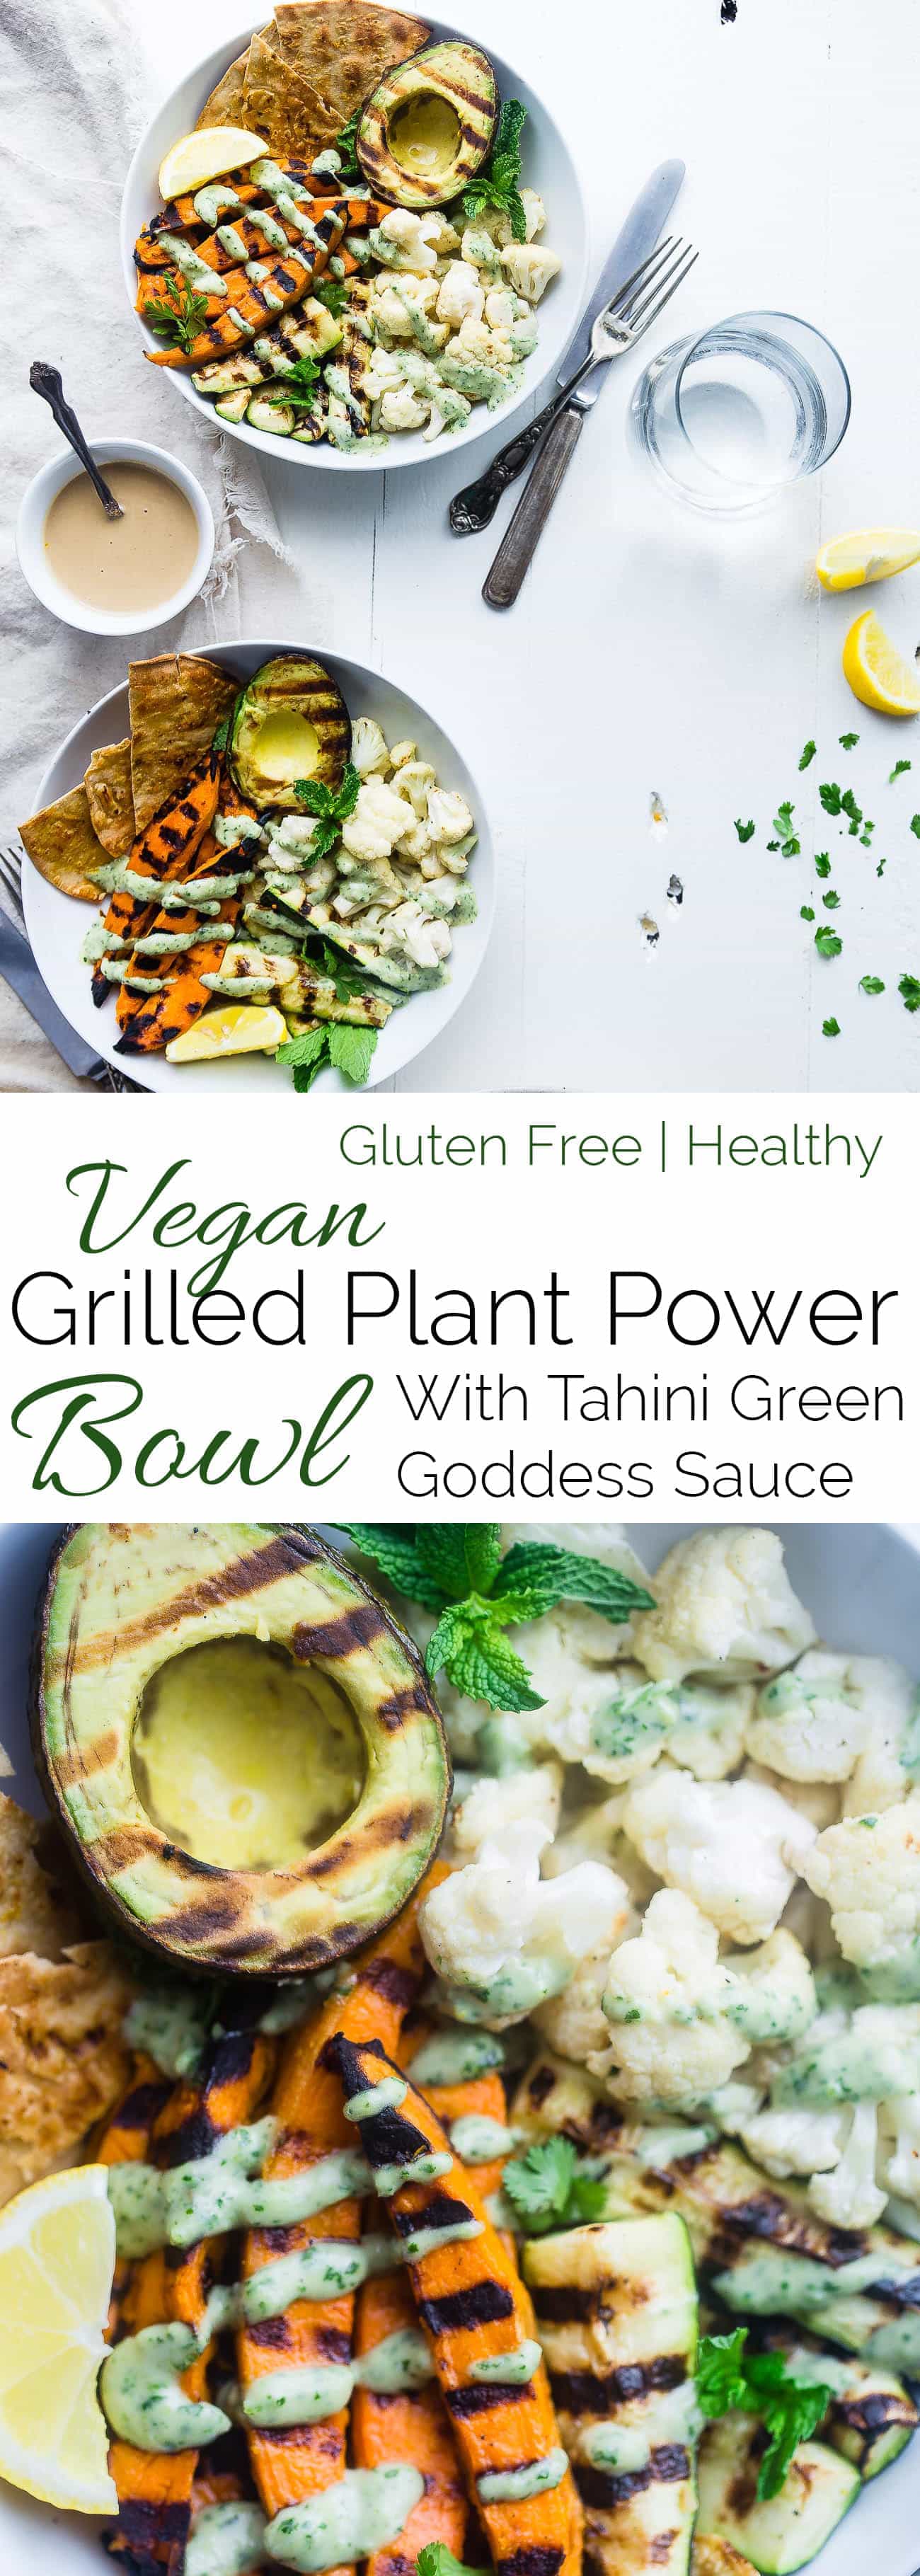 Vegan Grilled Plant Power Bowl - Loaded with tahini grilled avocado, cauliflower, sweet potatoes and zucchini to make a healthy, dairy and gluten free summer meal! Perfect for Meatless Monday! | Foodfaithfitness.com | @FoodFaithFit